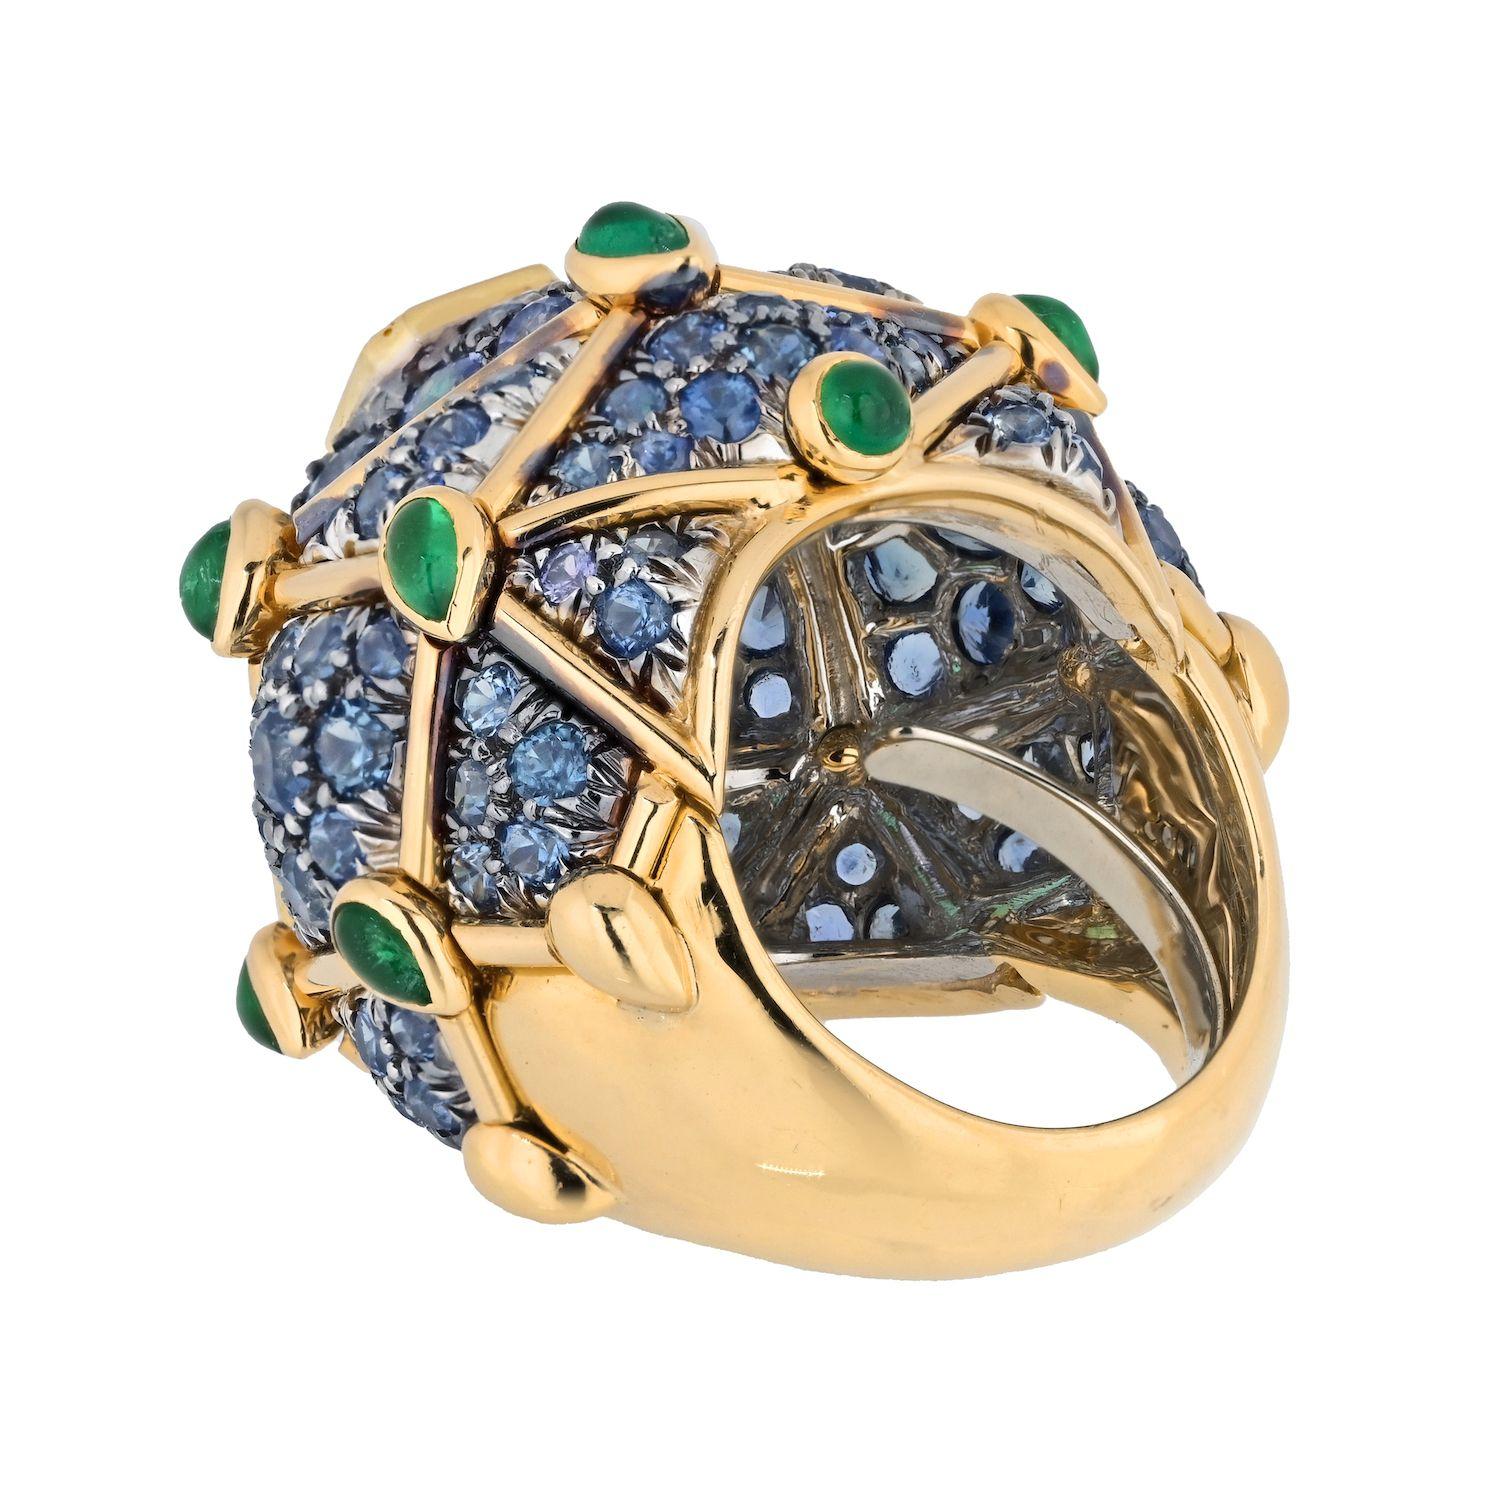 Indulge in the extraordinary with the David Webb Platinum & 18K Yellow Gold Geodesic Dome Emerald and Sapphire Ring. This ring, a true testament to exquisite craftsmanship, combines luxurious materials and intricate design to create a captivating